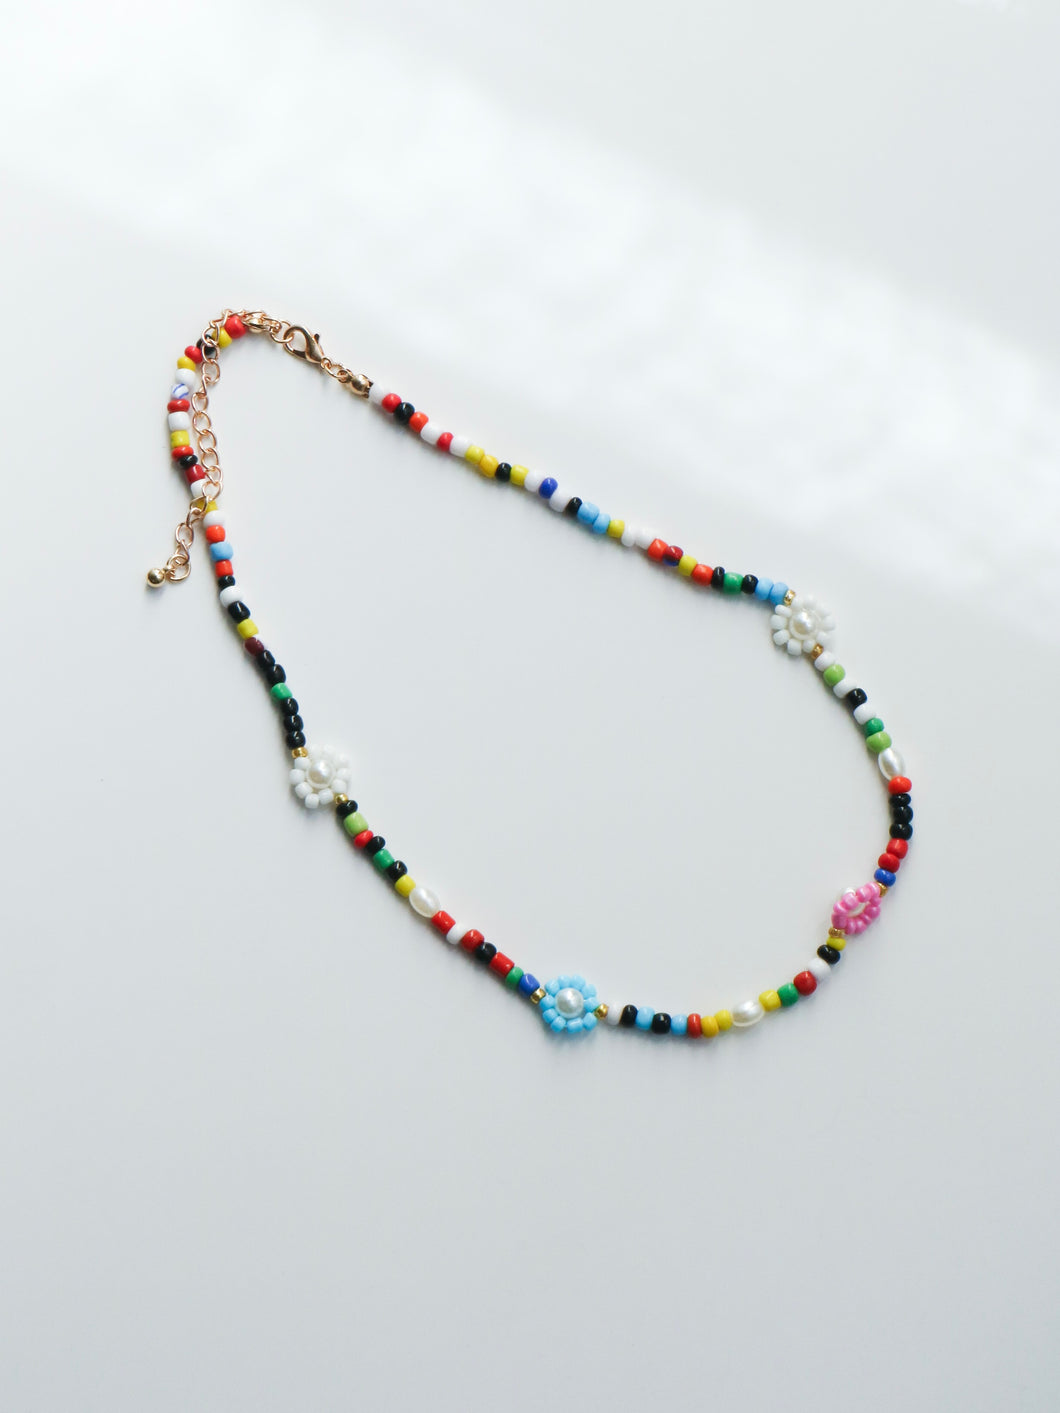 Small Flower Beads Necklace